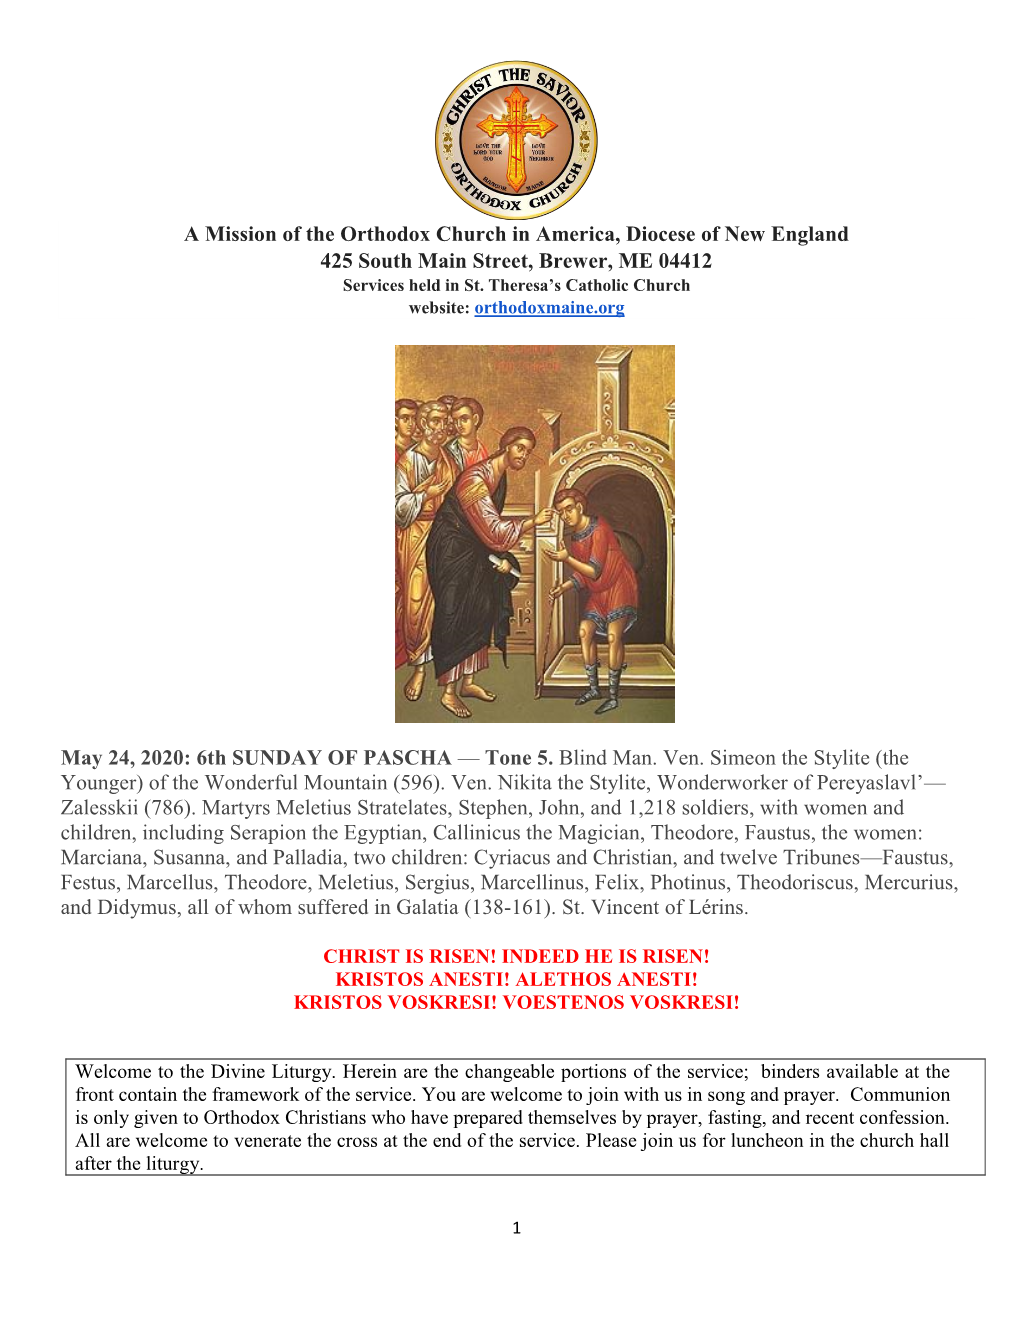 A Mission of the Orthodox Church in America, Diocese of New England 425 South Main Street, Brewer, ME 04412 May 24, 2020: 6Th SU